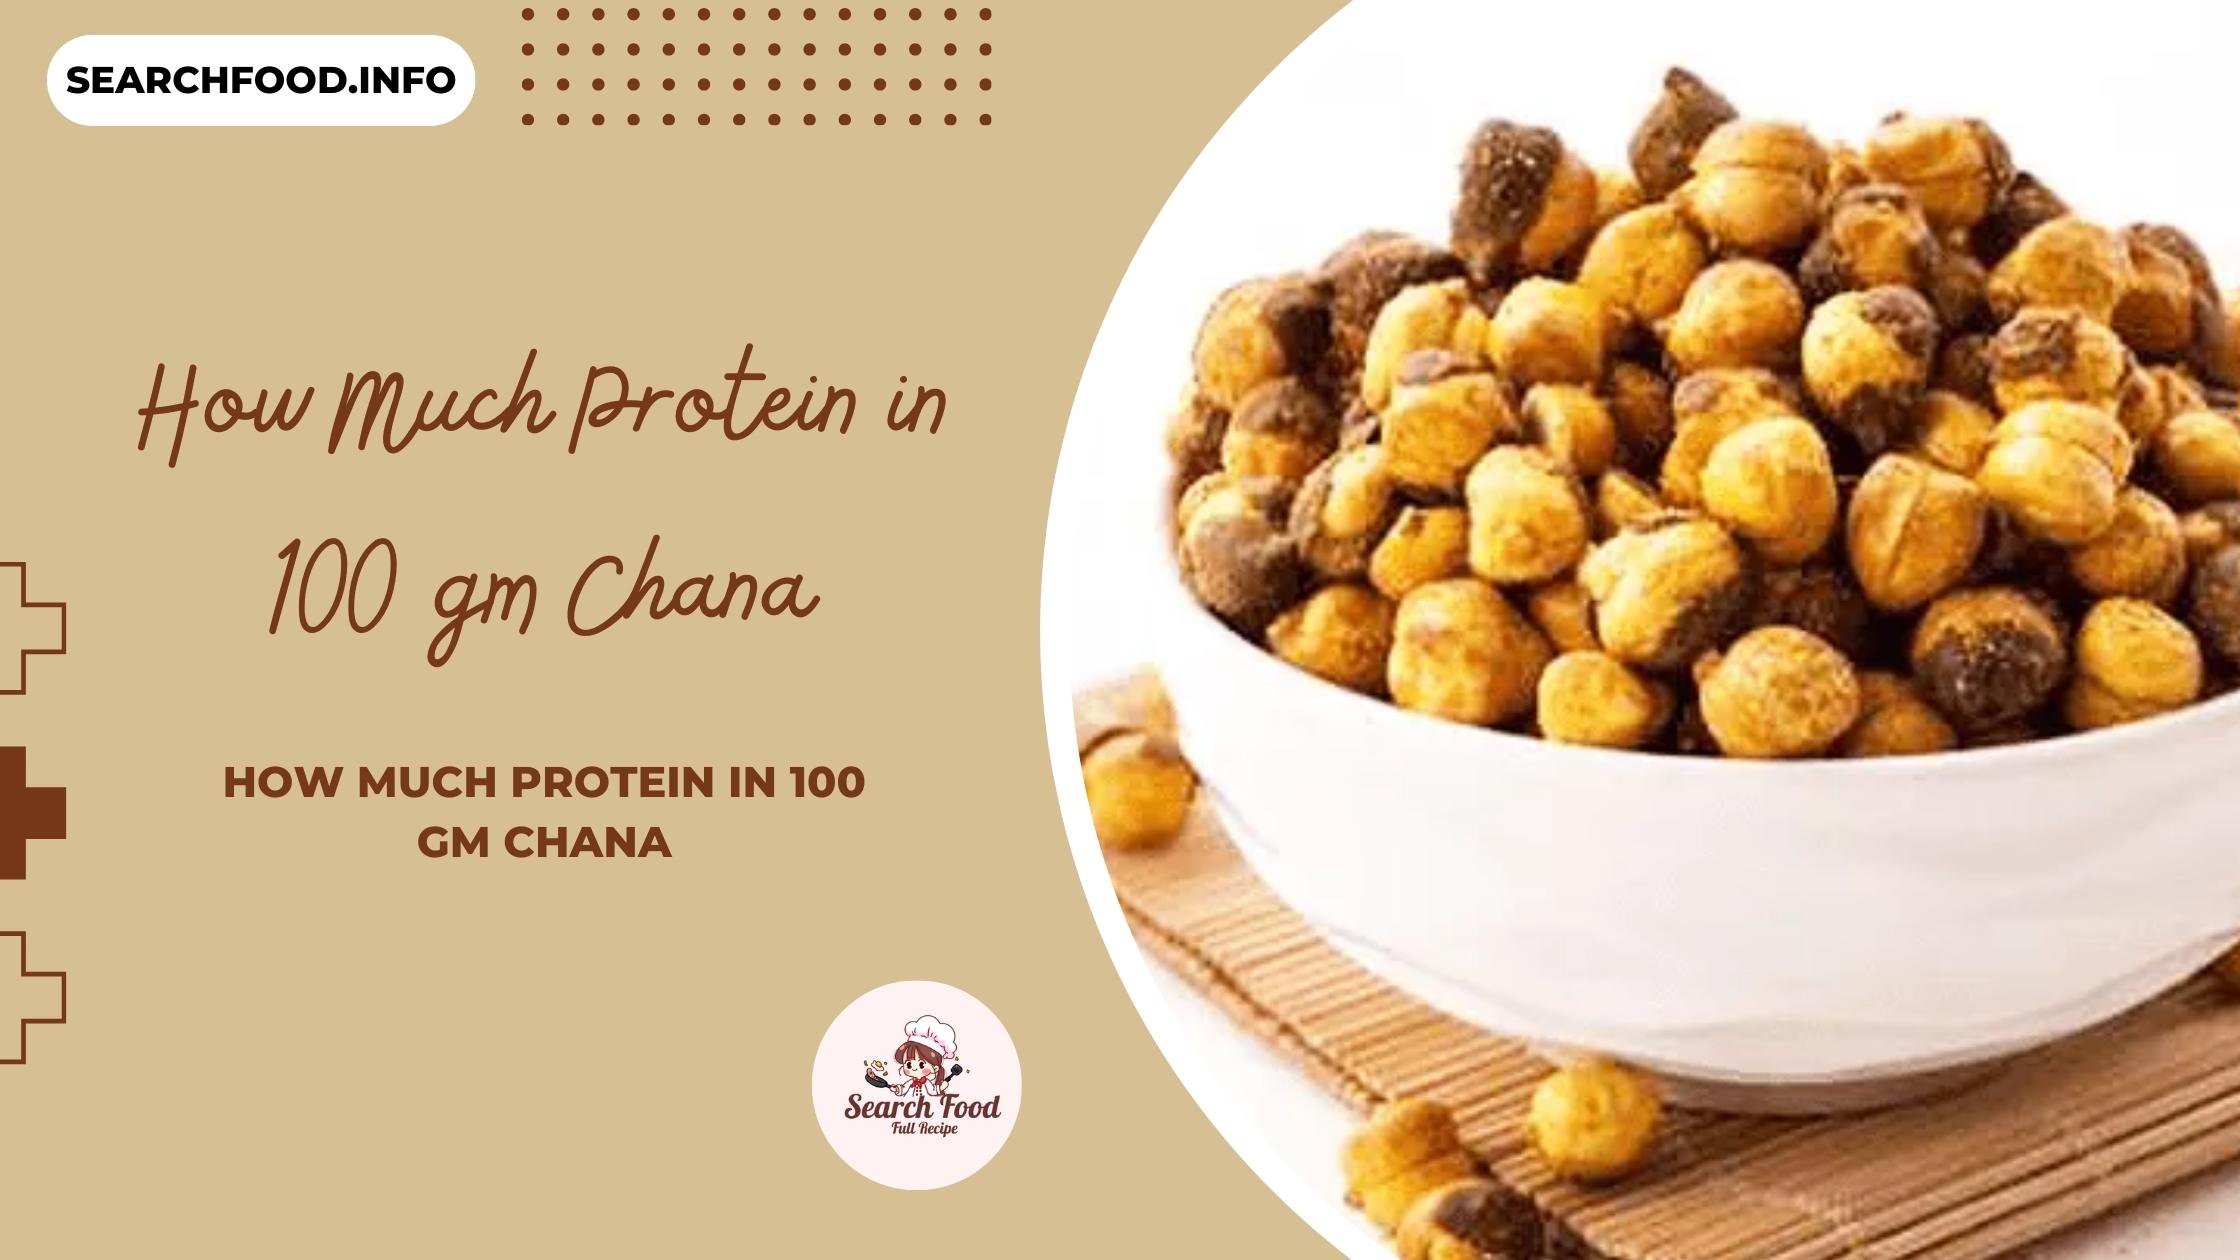 How Much Protein in 100 gm Chana